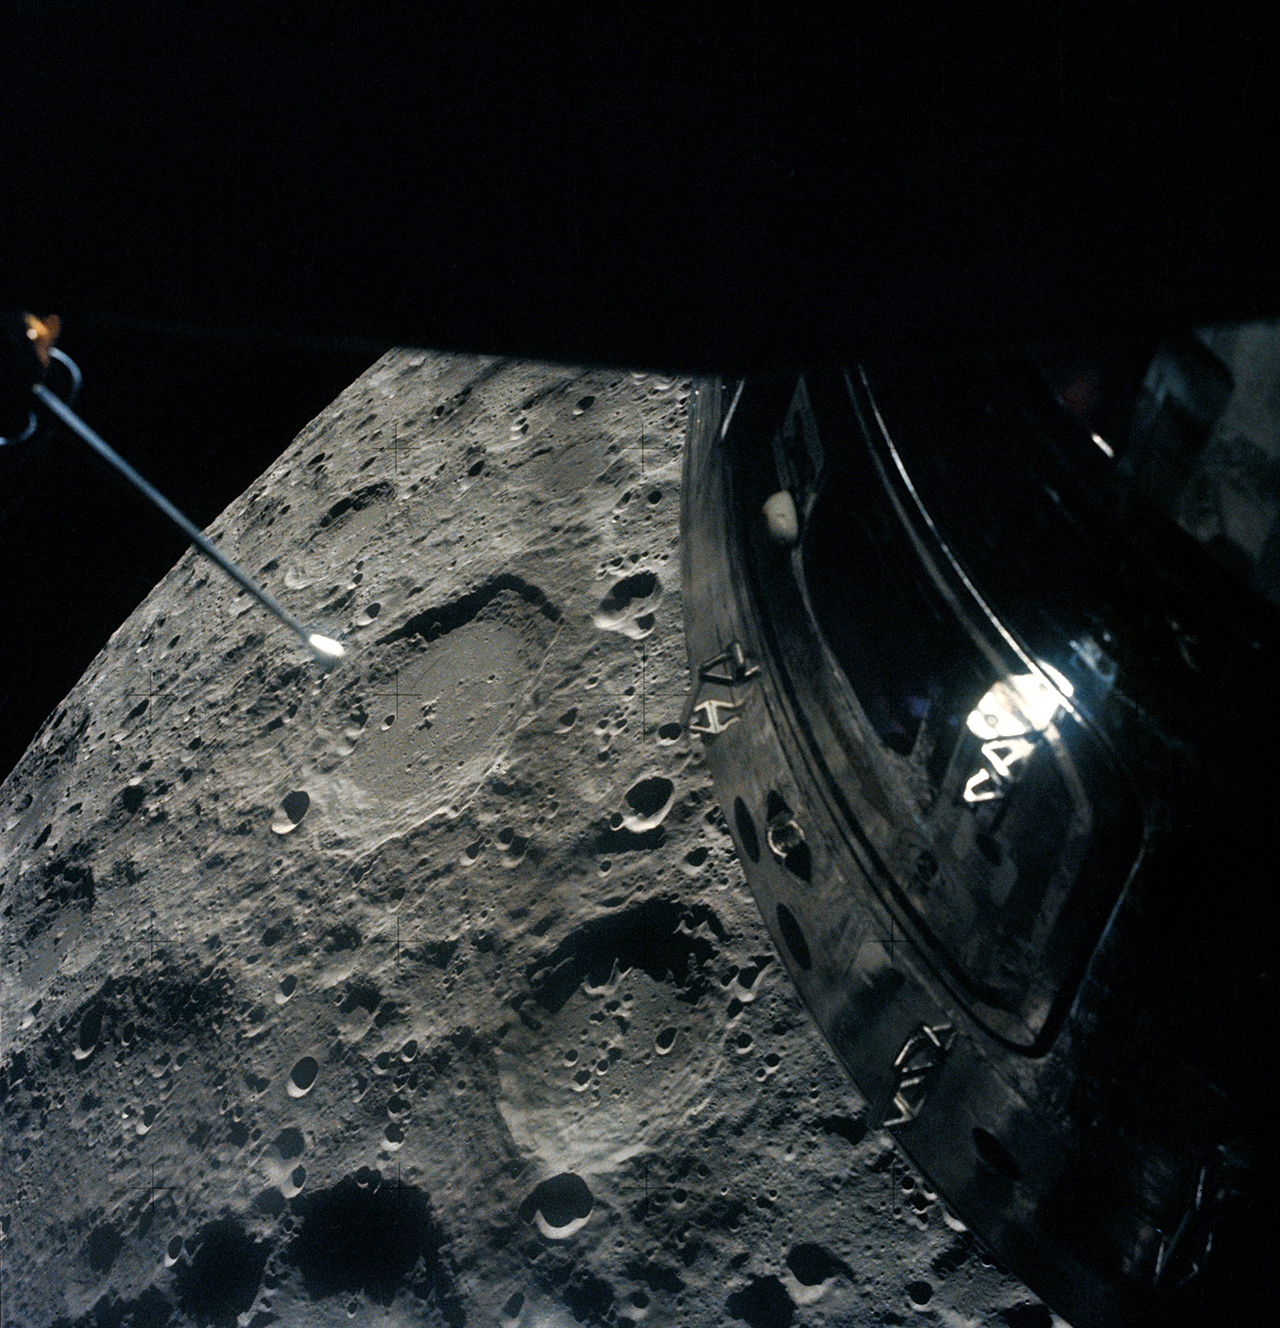 The moon and Apollo 13 command module seen from the mission's lunar module on April 15, 1970, a day after the crew and spacecraft set a record for the farthest distance traveled from Earth